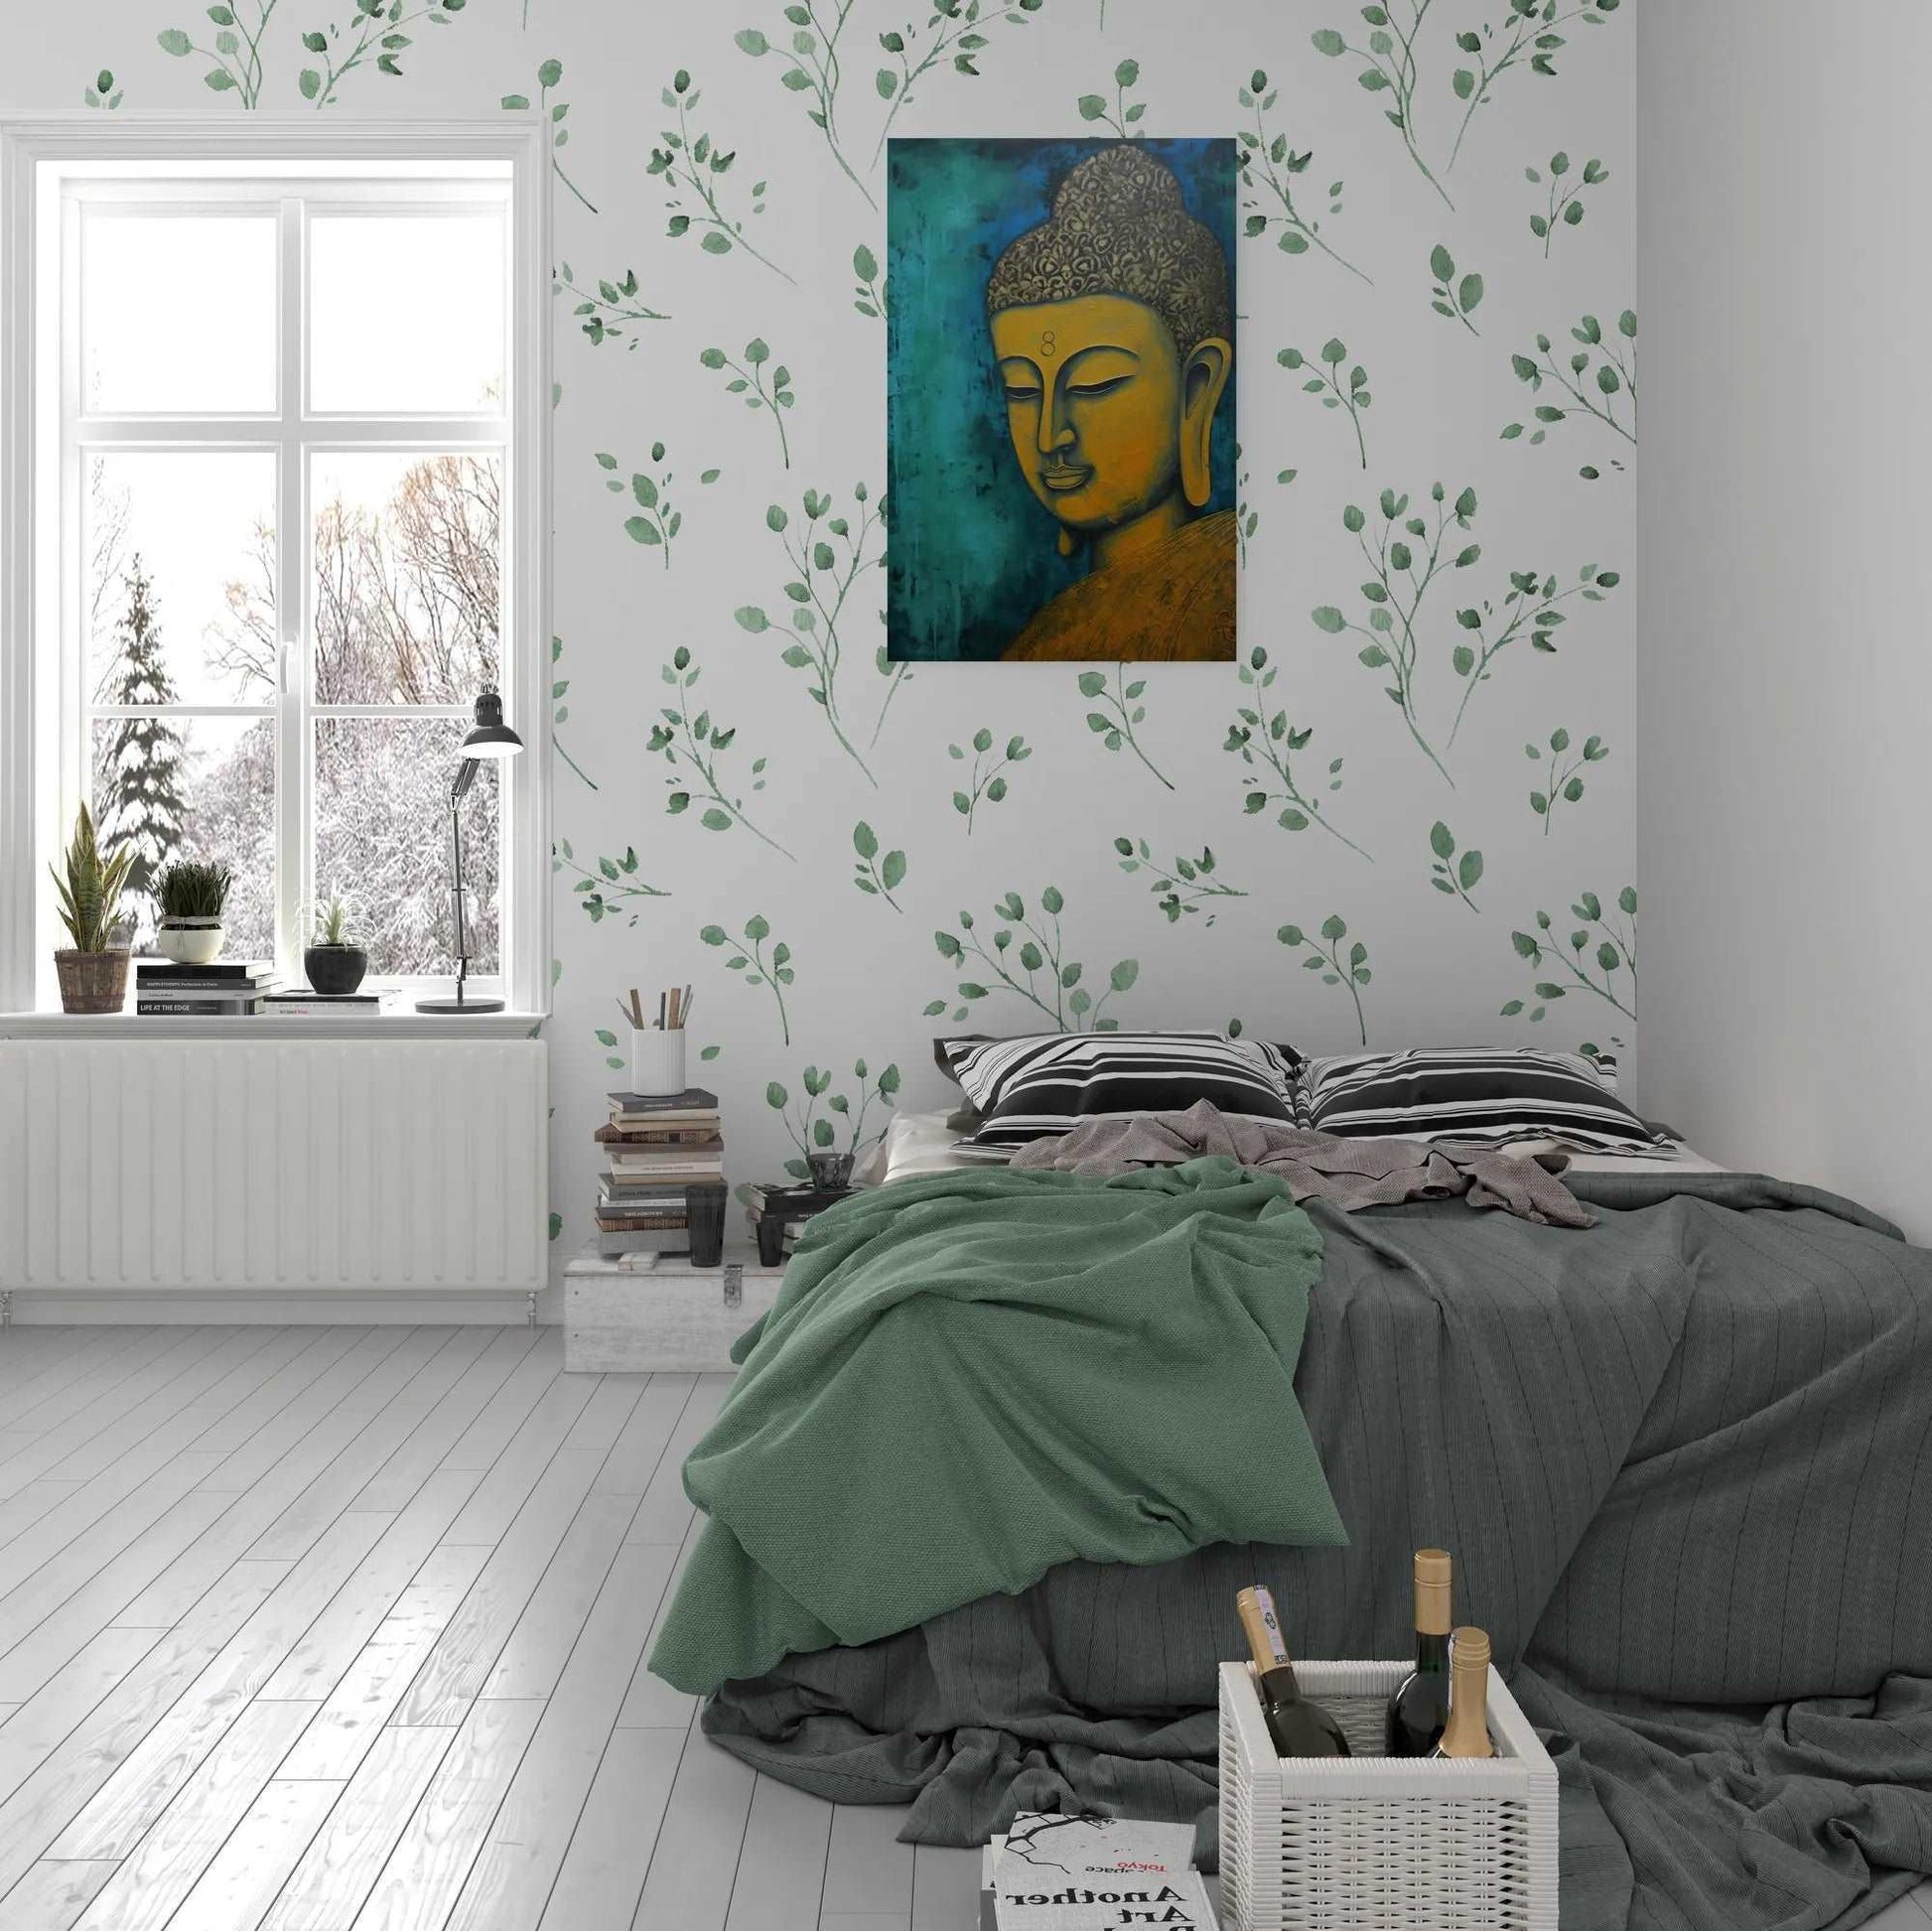 Tranquil golden Buddha painting on a wall adorned with leafy branches, in a bedroom with winter scenery outside the window.